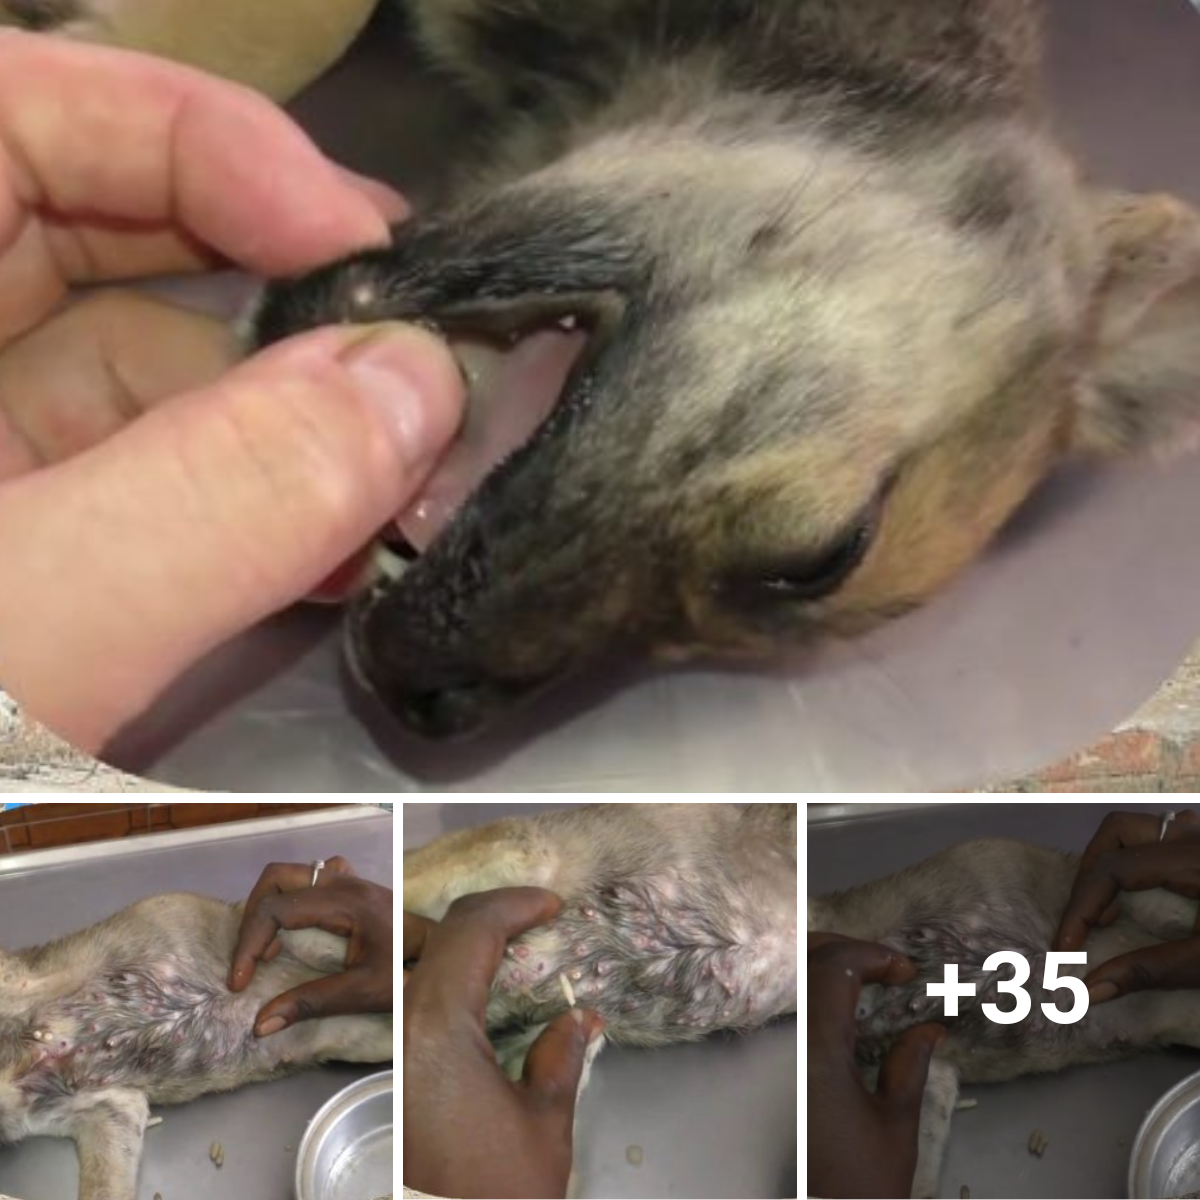 Fight maggots and take care of a malnourished dog. Wishing the dog a quick recovery